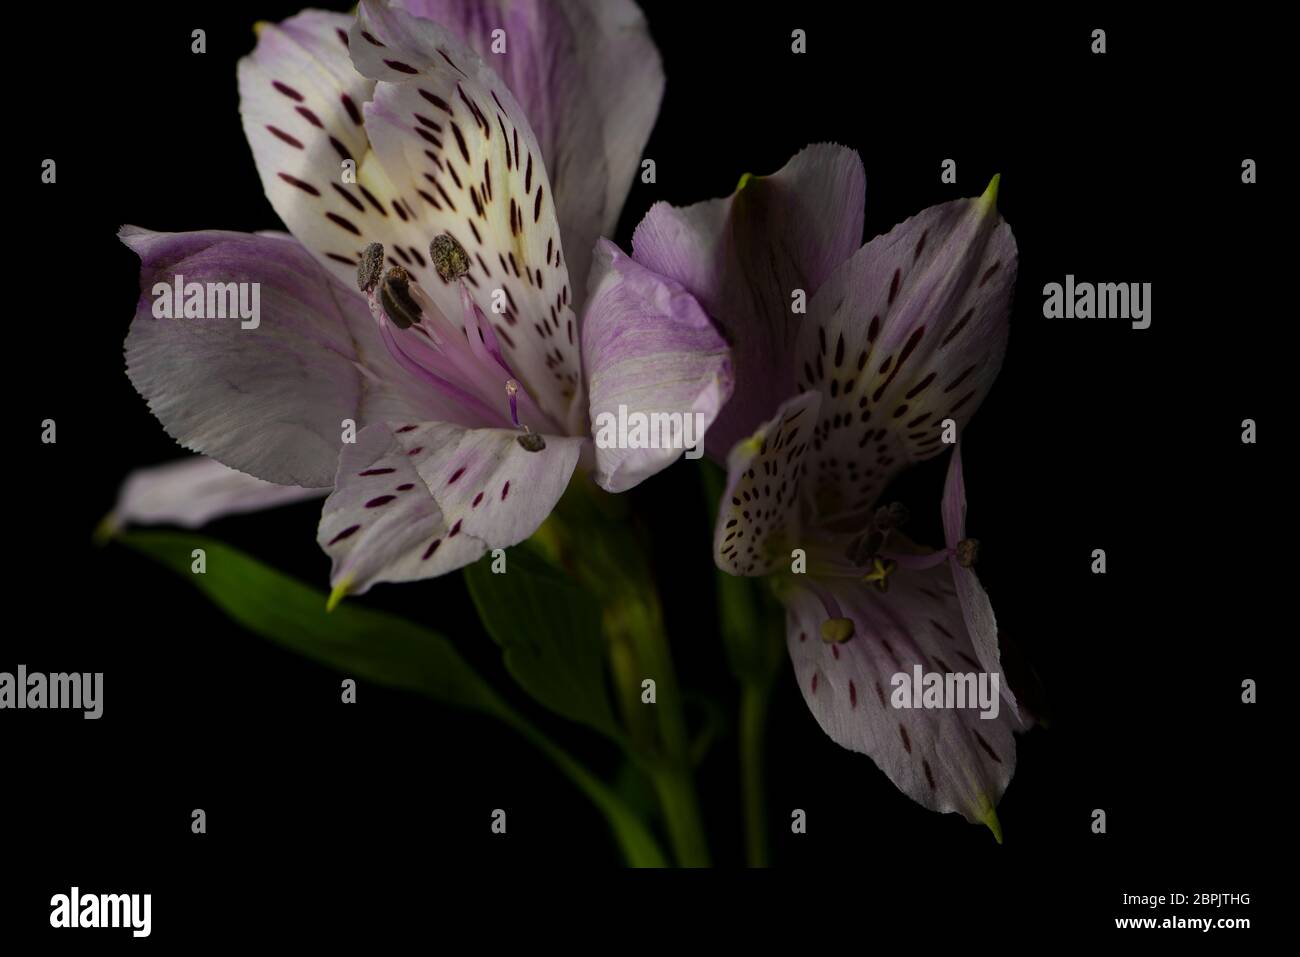 Purple Peruvian Lily, or Lily of the Incas, flower on a black background Stock Photo